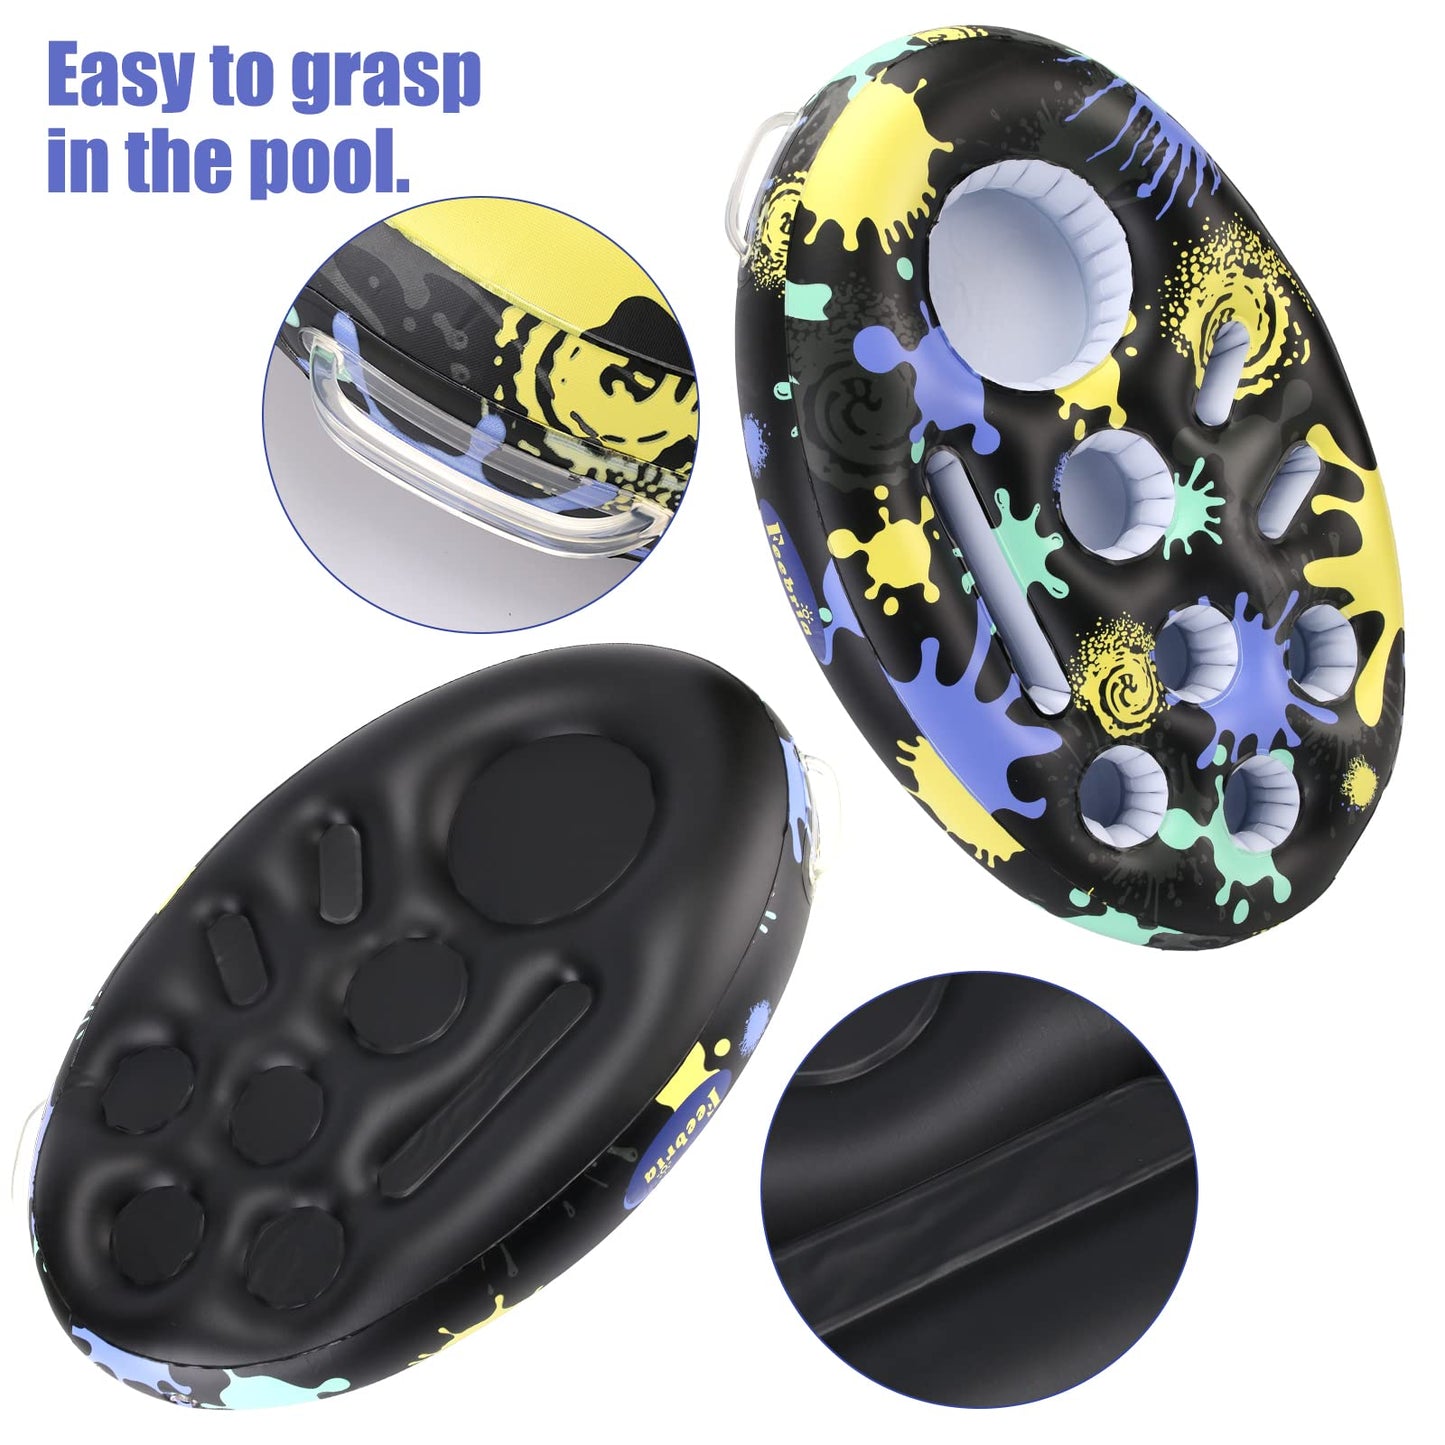 FEEBRIA Inflatable Floating Drink Holder with 9 Holes Large Capacity Drink Float for Pools & Hot Tub (Black&Yellow) Black&Yellow